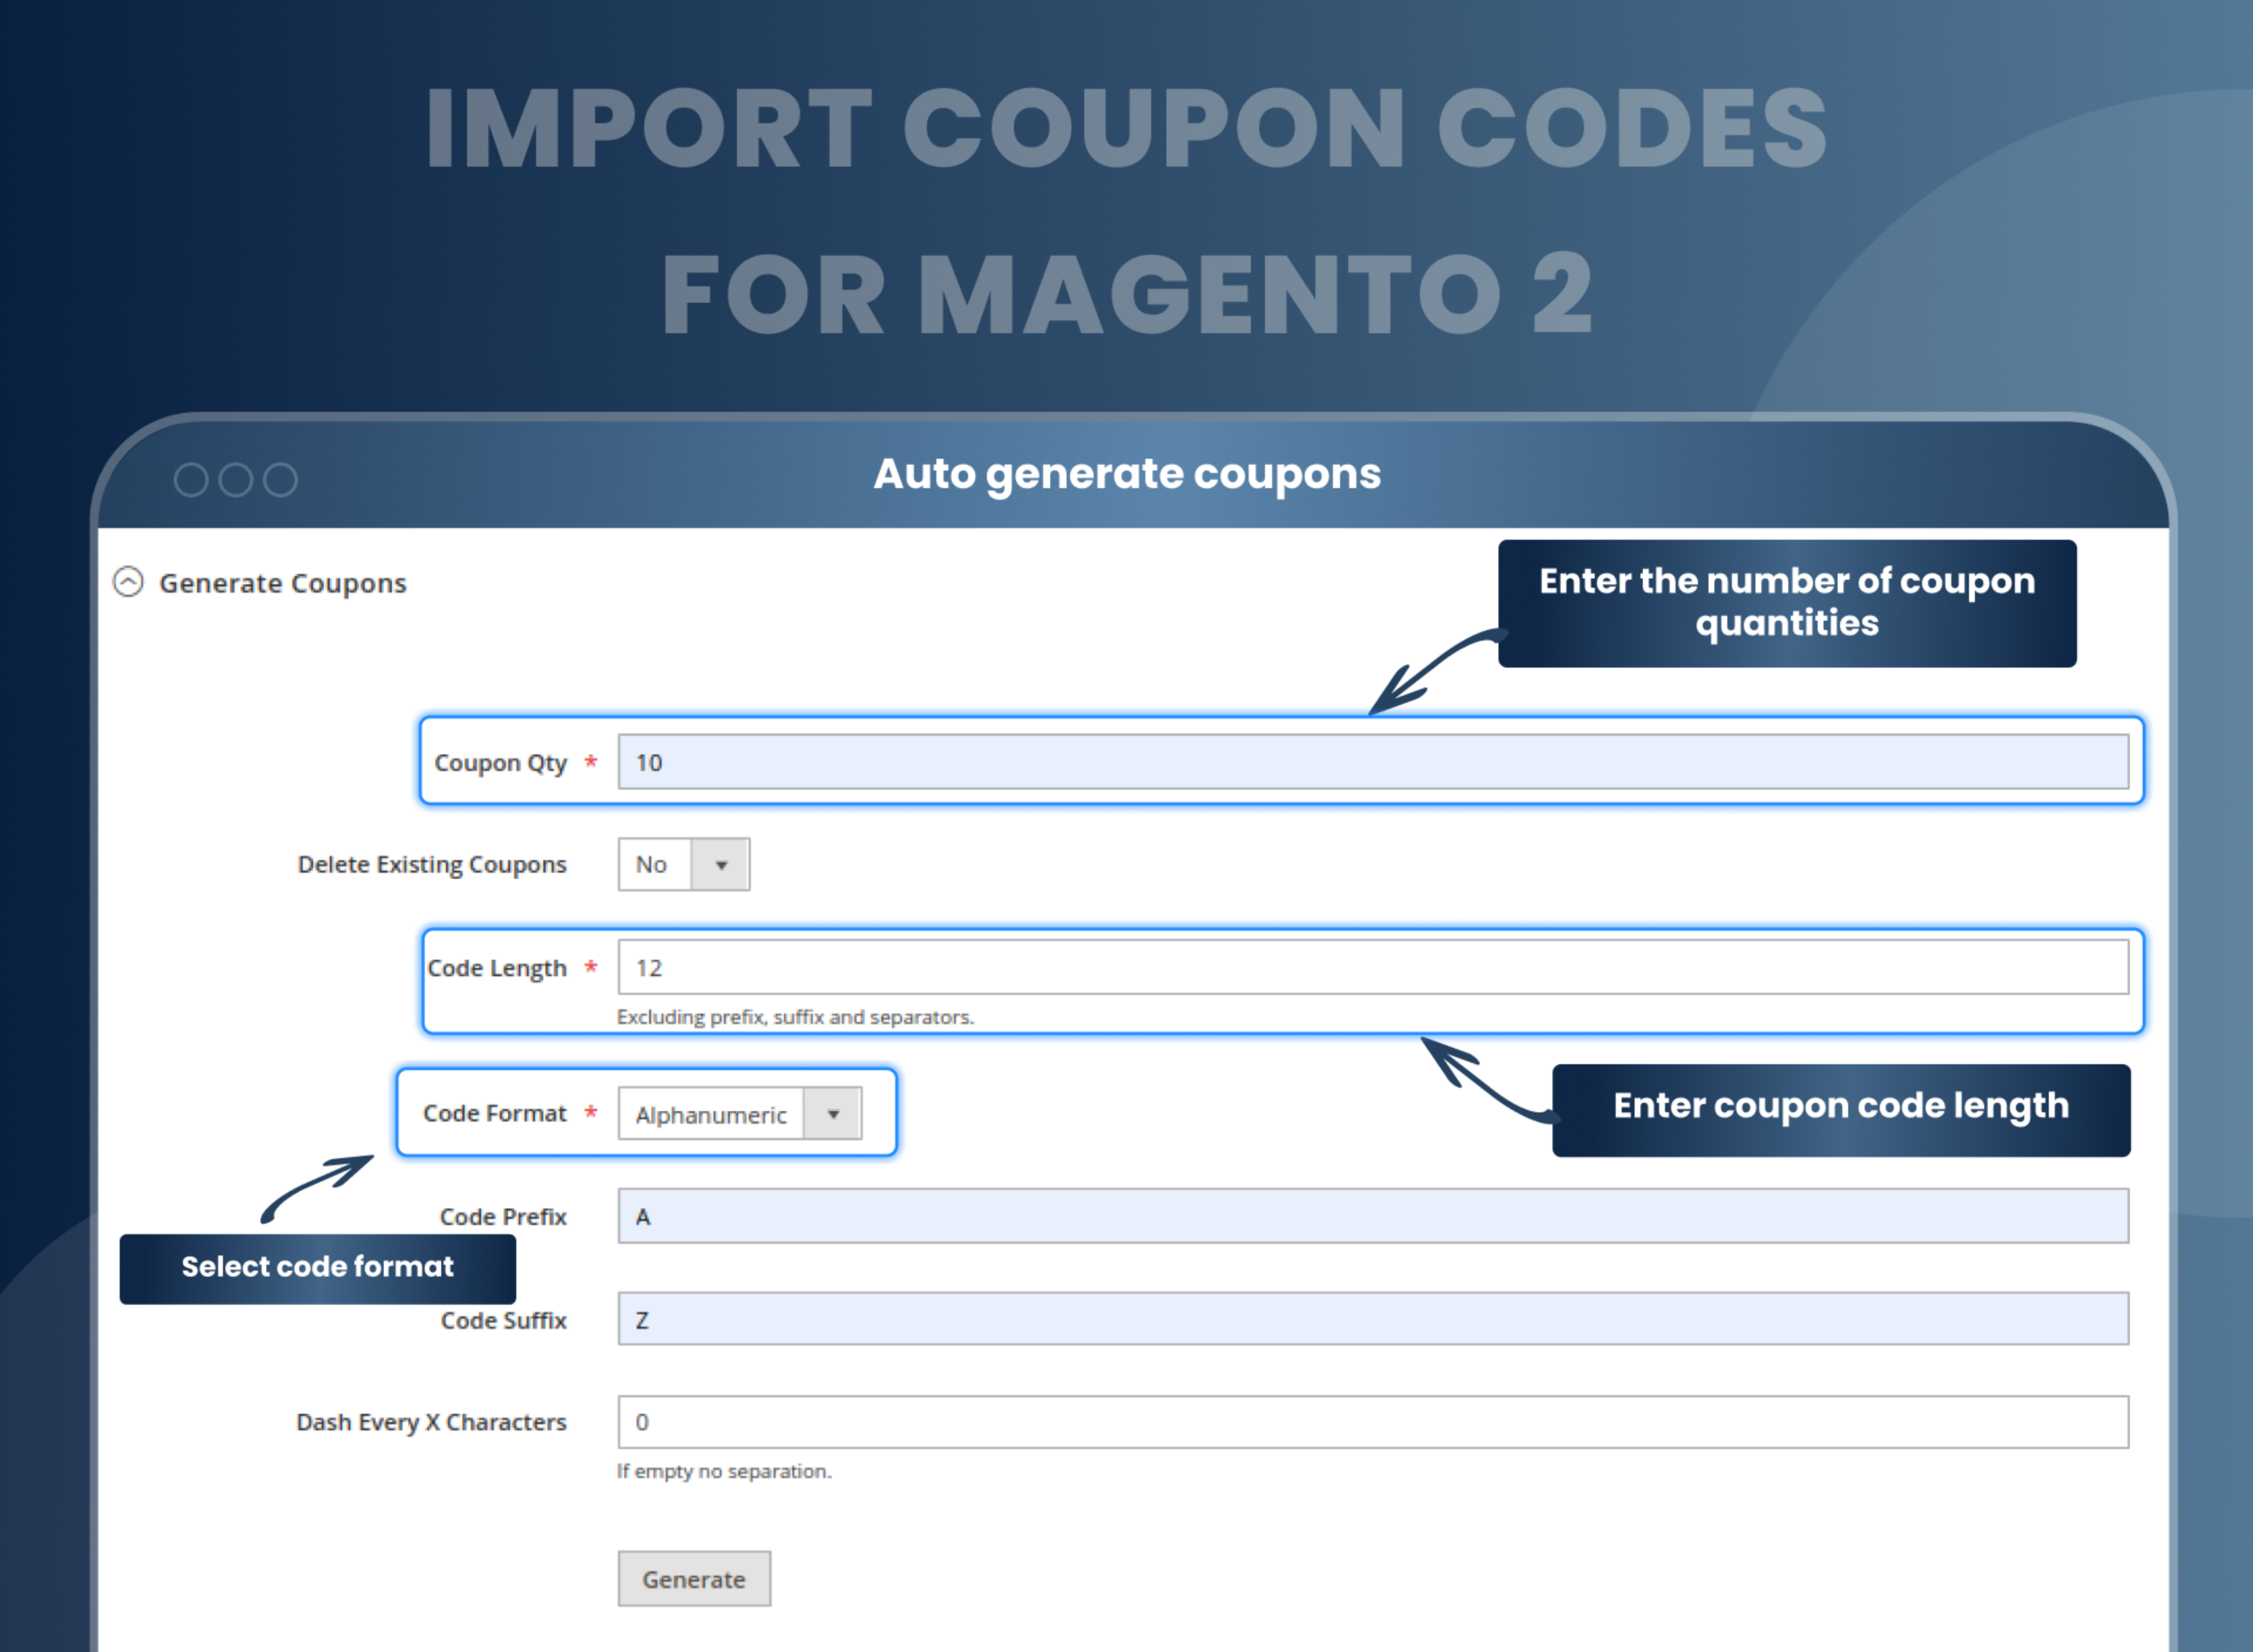 Auto generate coupons